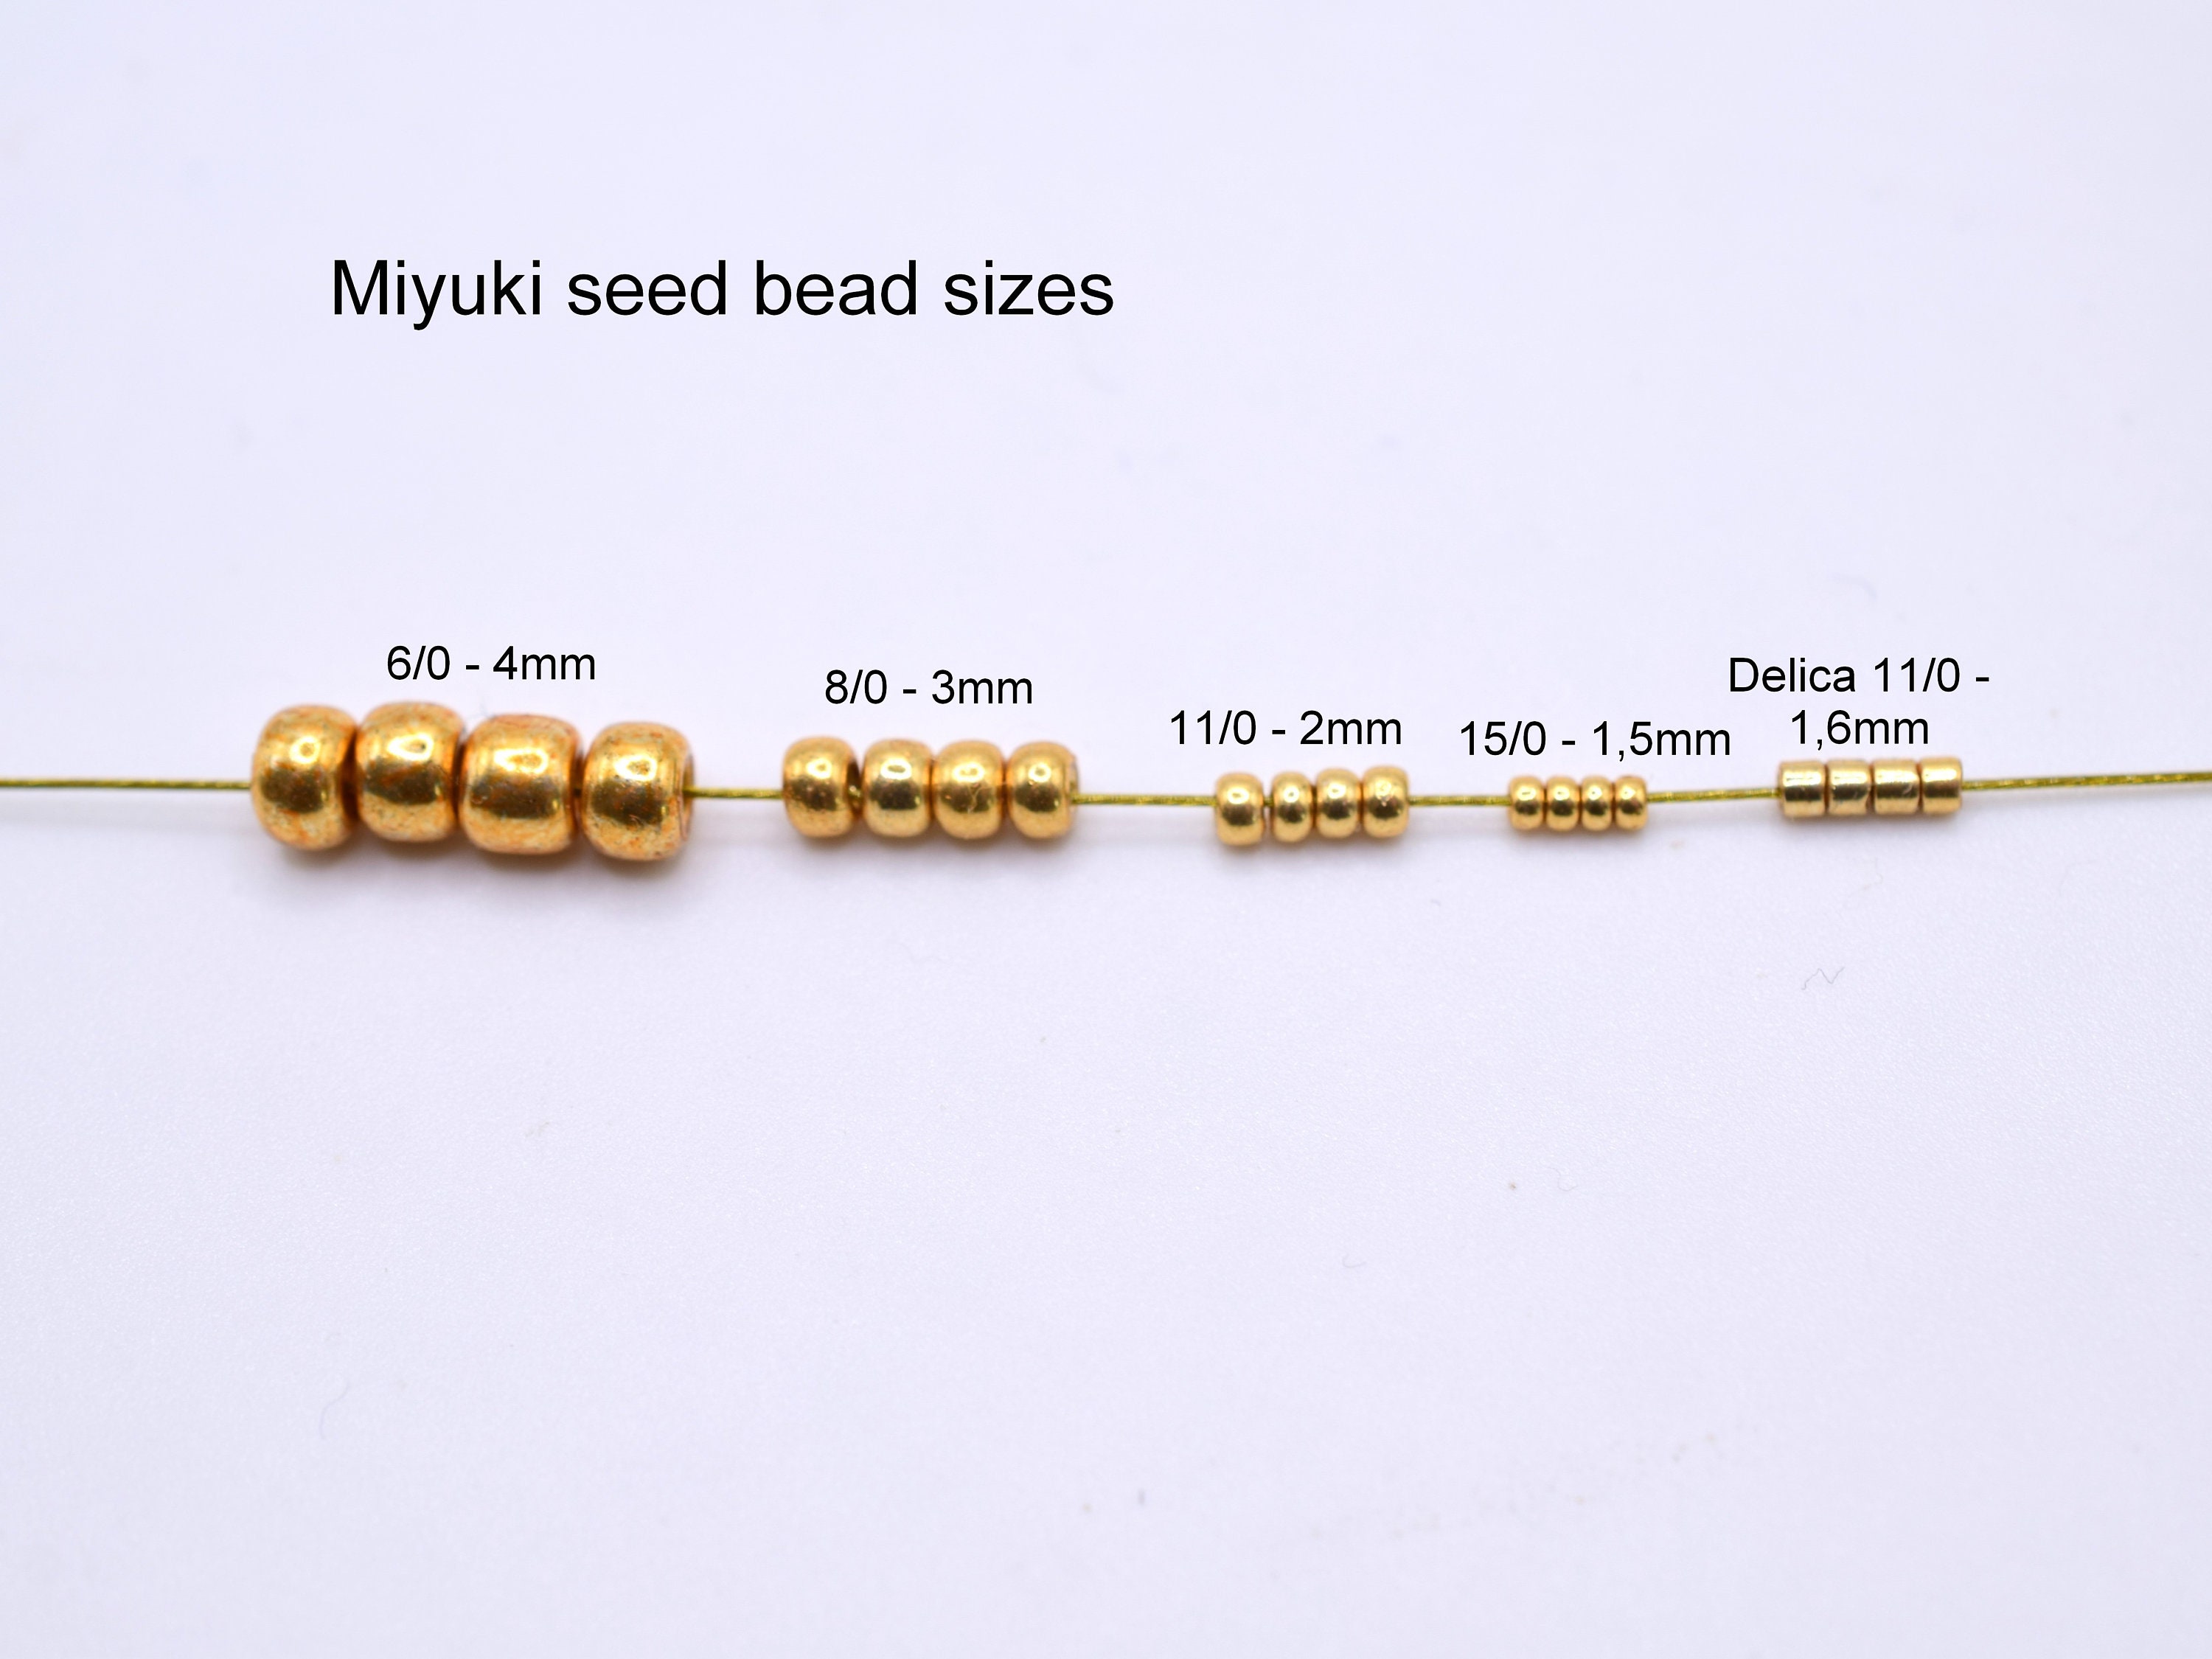 10g 2mm/3mm Matte Magic Color Charm Czech Glass Seed Beads for